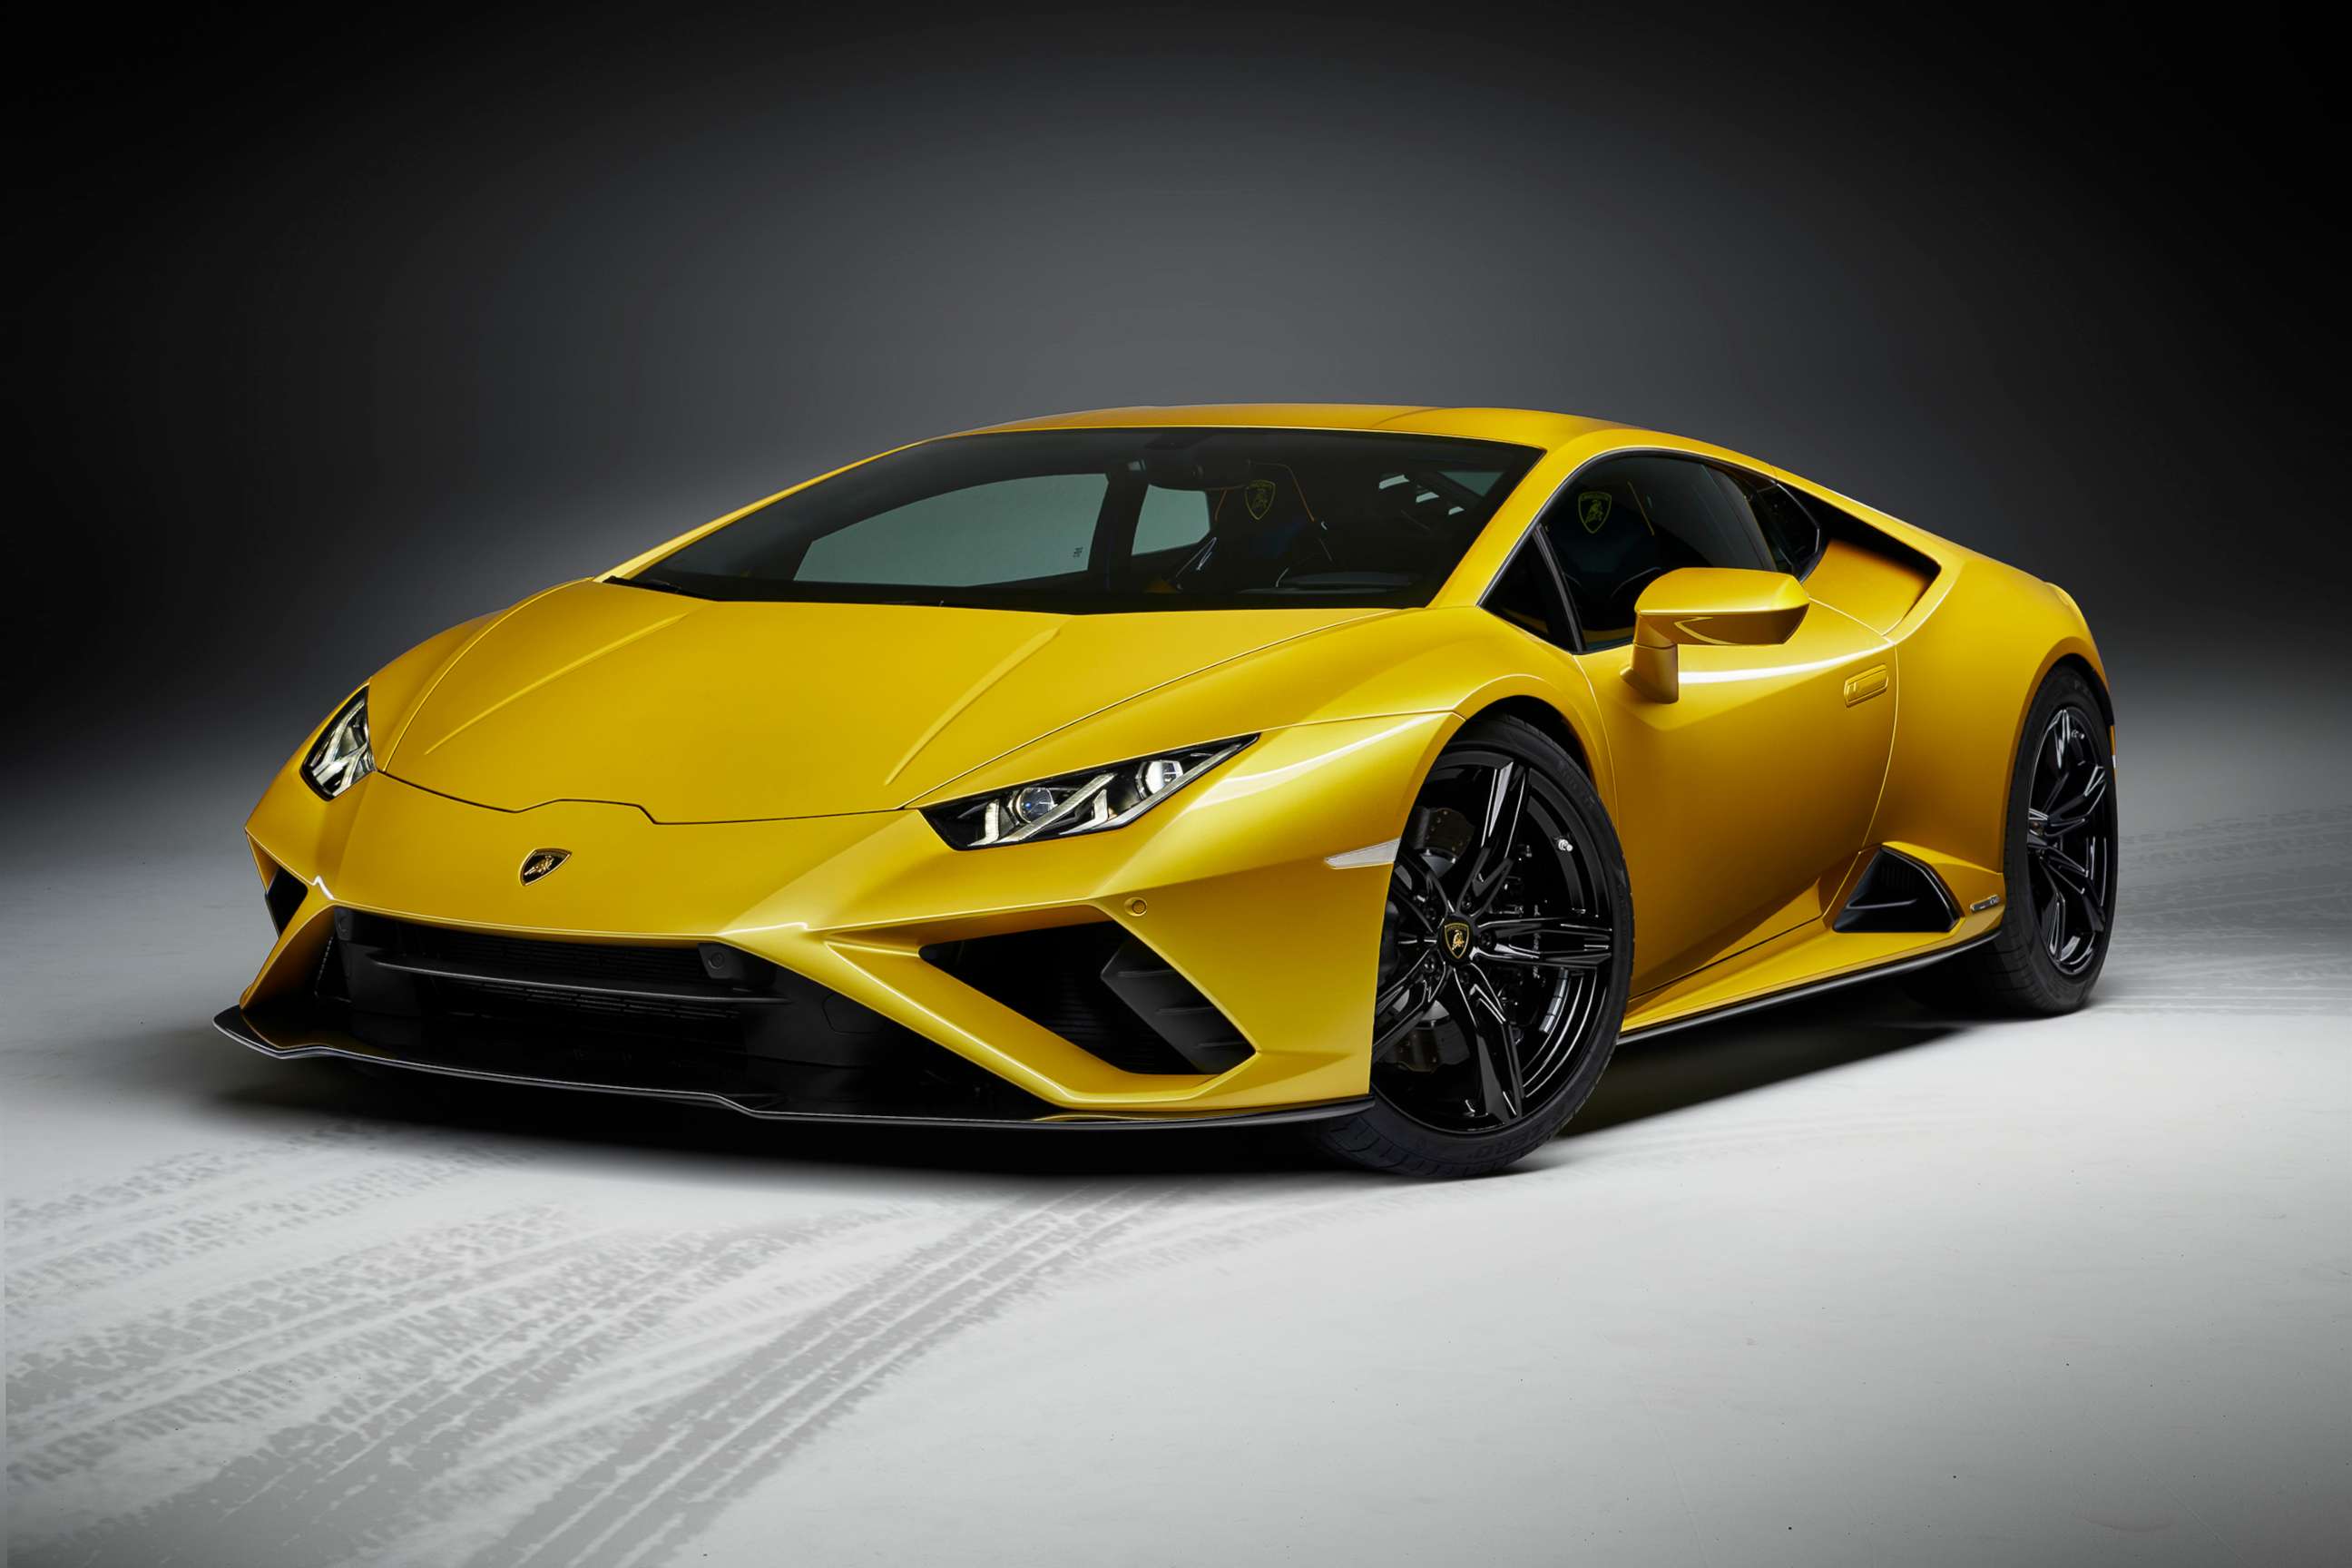 PHOTO: The naturally aspirated V10 engine in the Huracan EVO Rear-Wheel Drive (RWD) produces 610 horsepower.